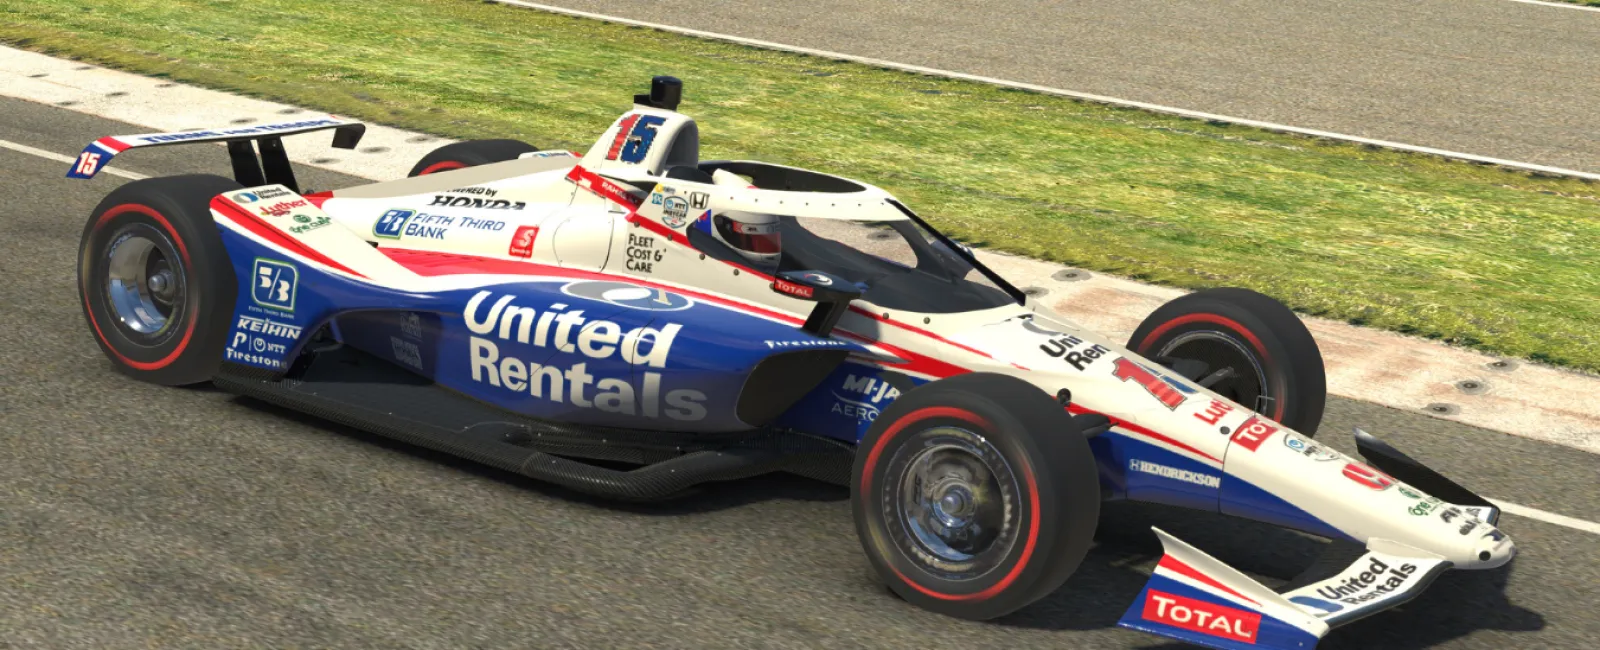 iRacing Raises $19,400 for Turns For Troops